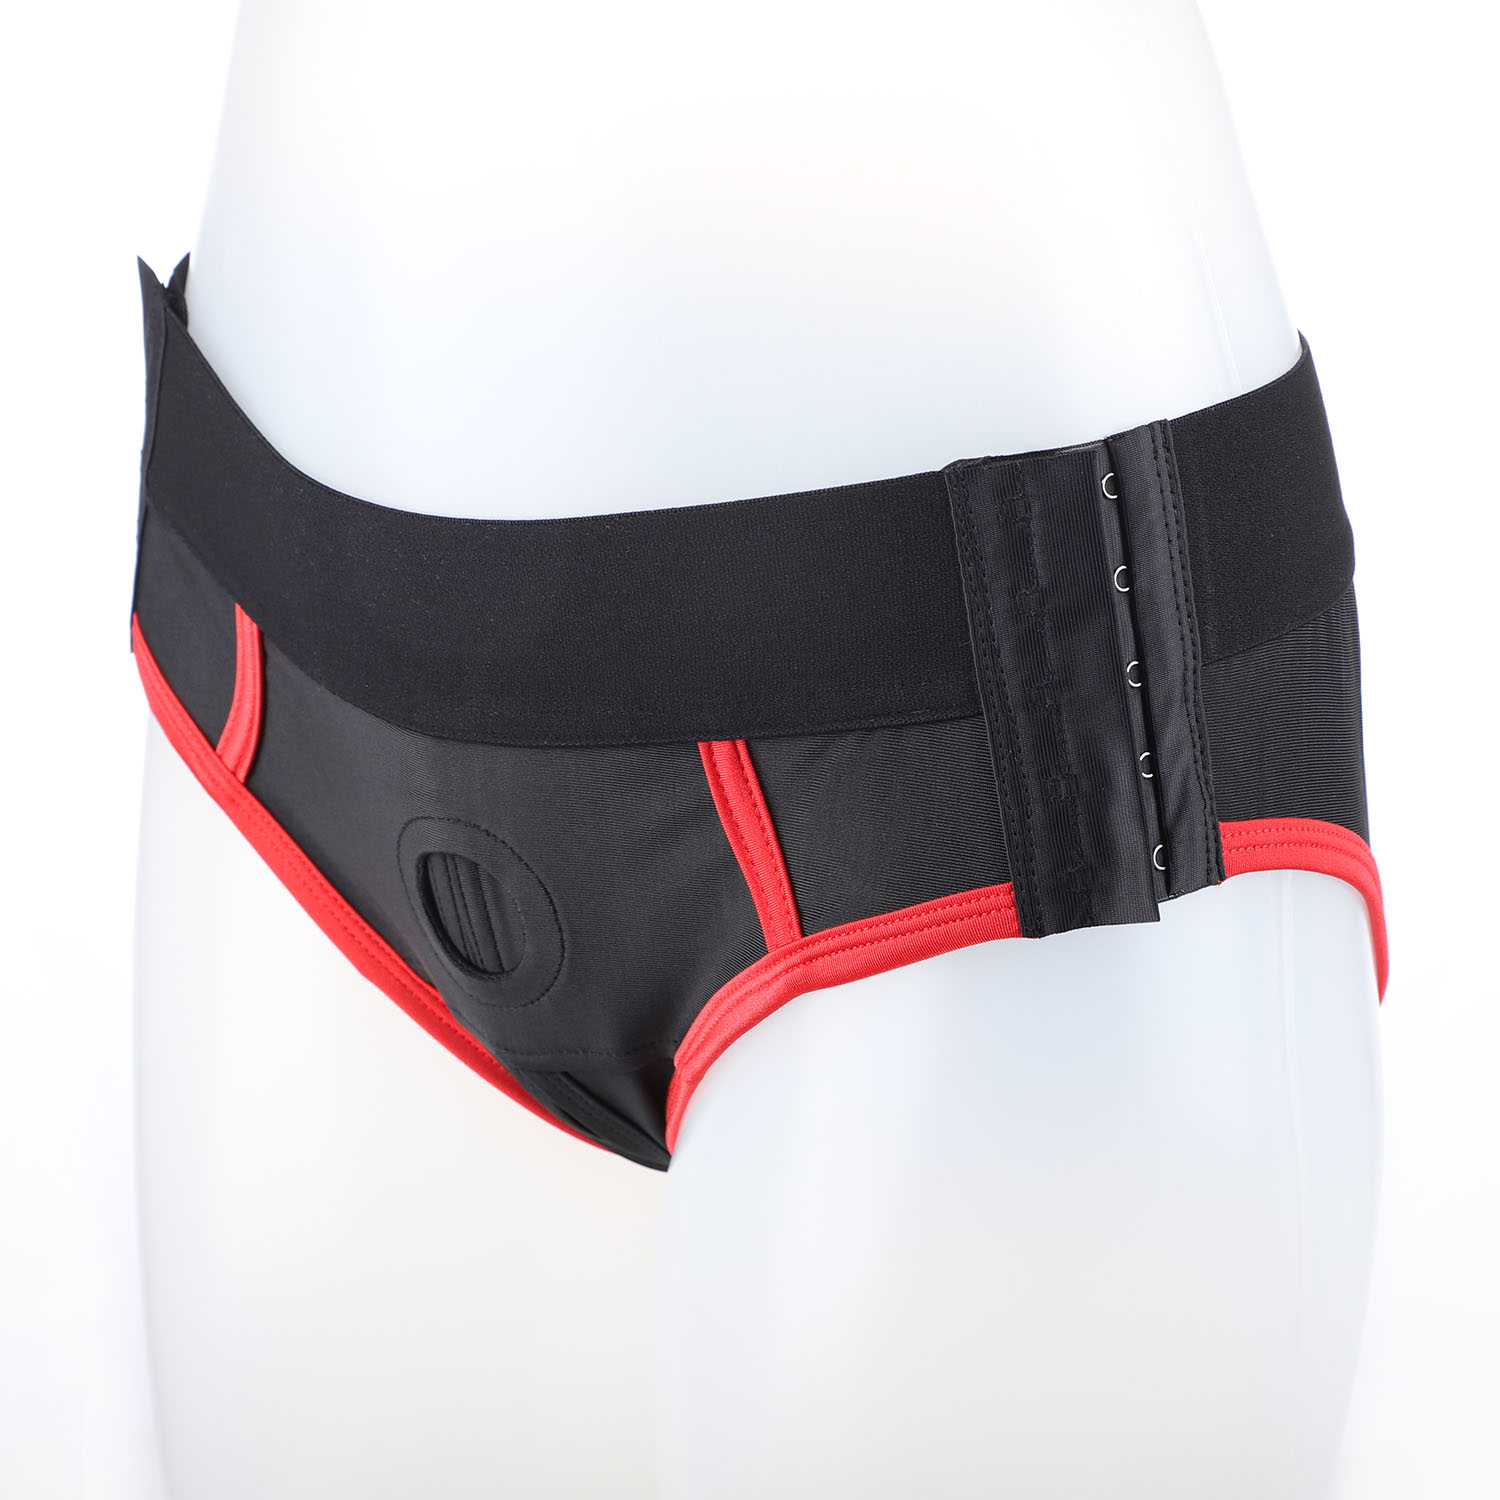 BRIEF HARNESS WITH BUCKLE